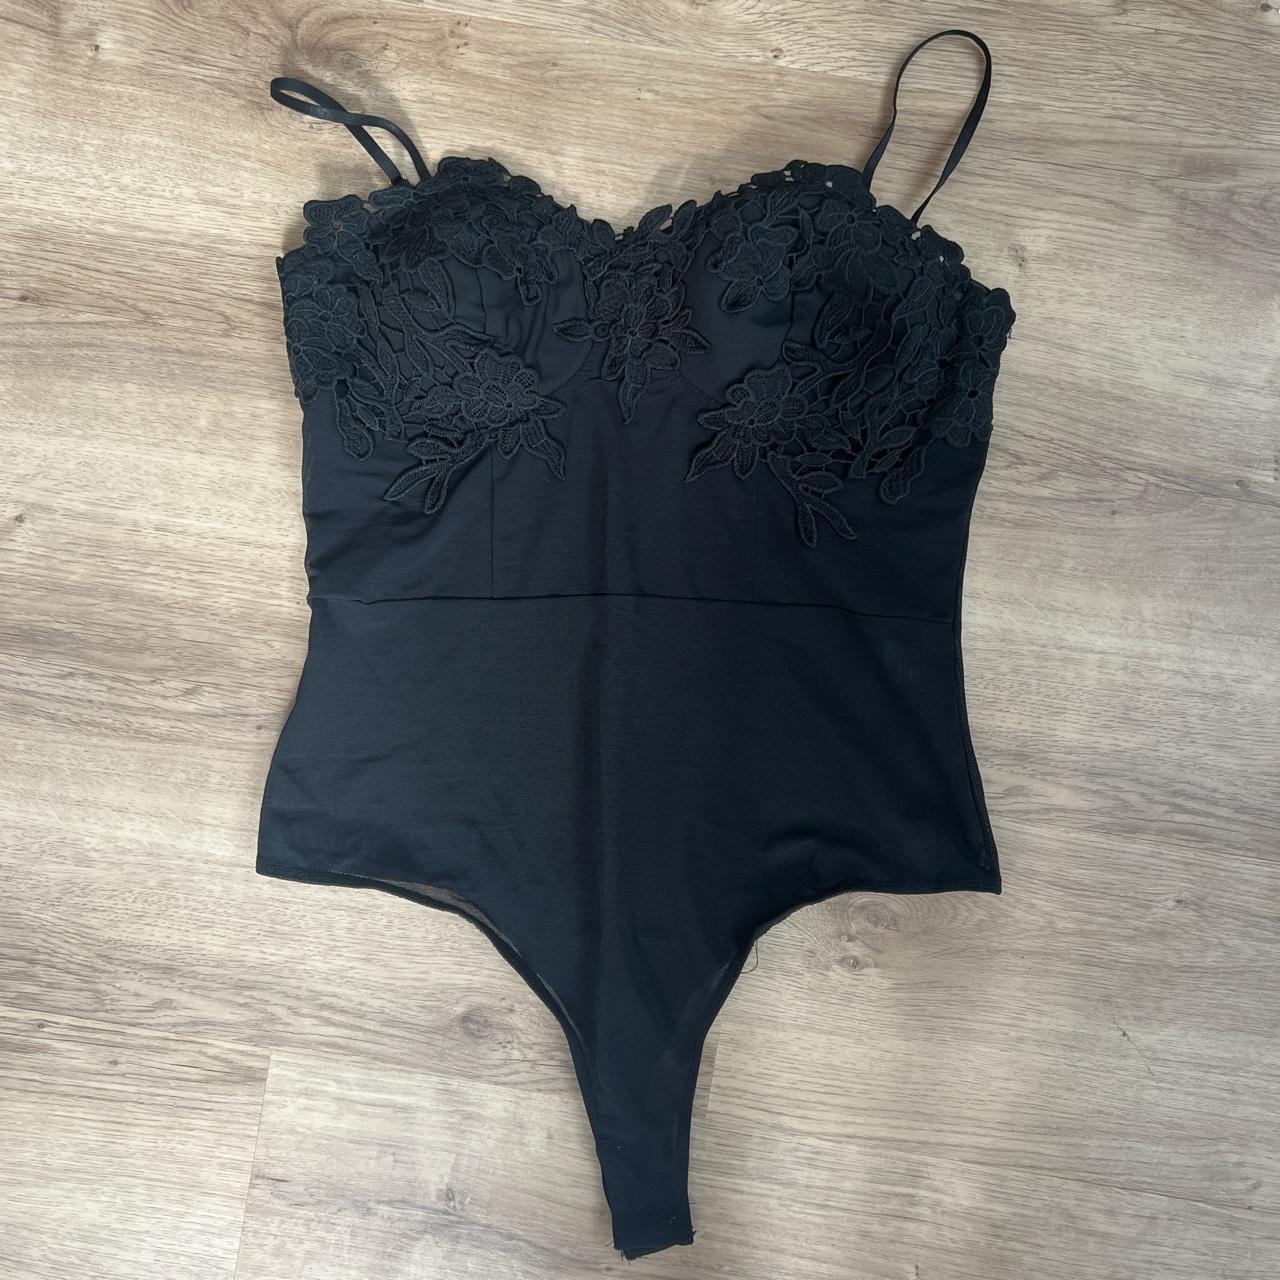 Sexy black sheer bodysuit🖤 thong fit so doesn't show - Depop